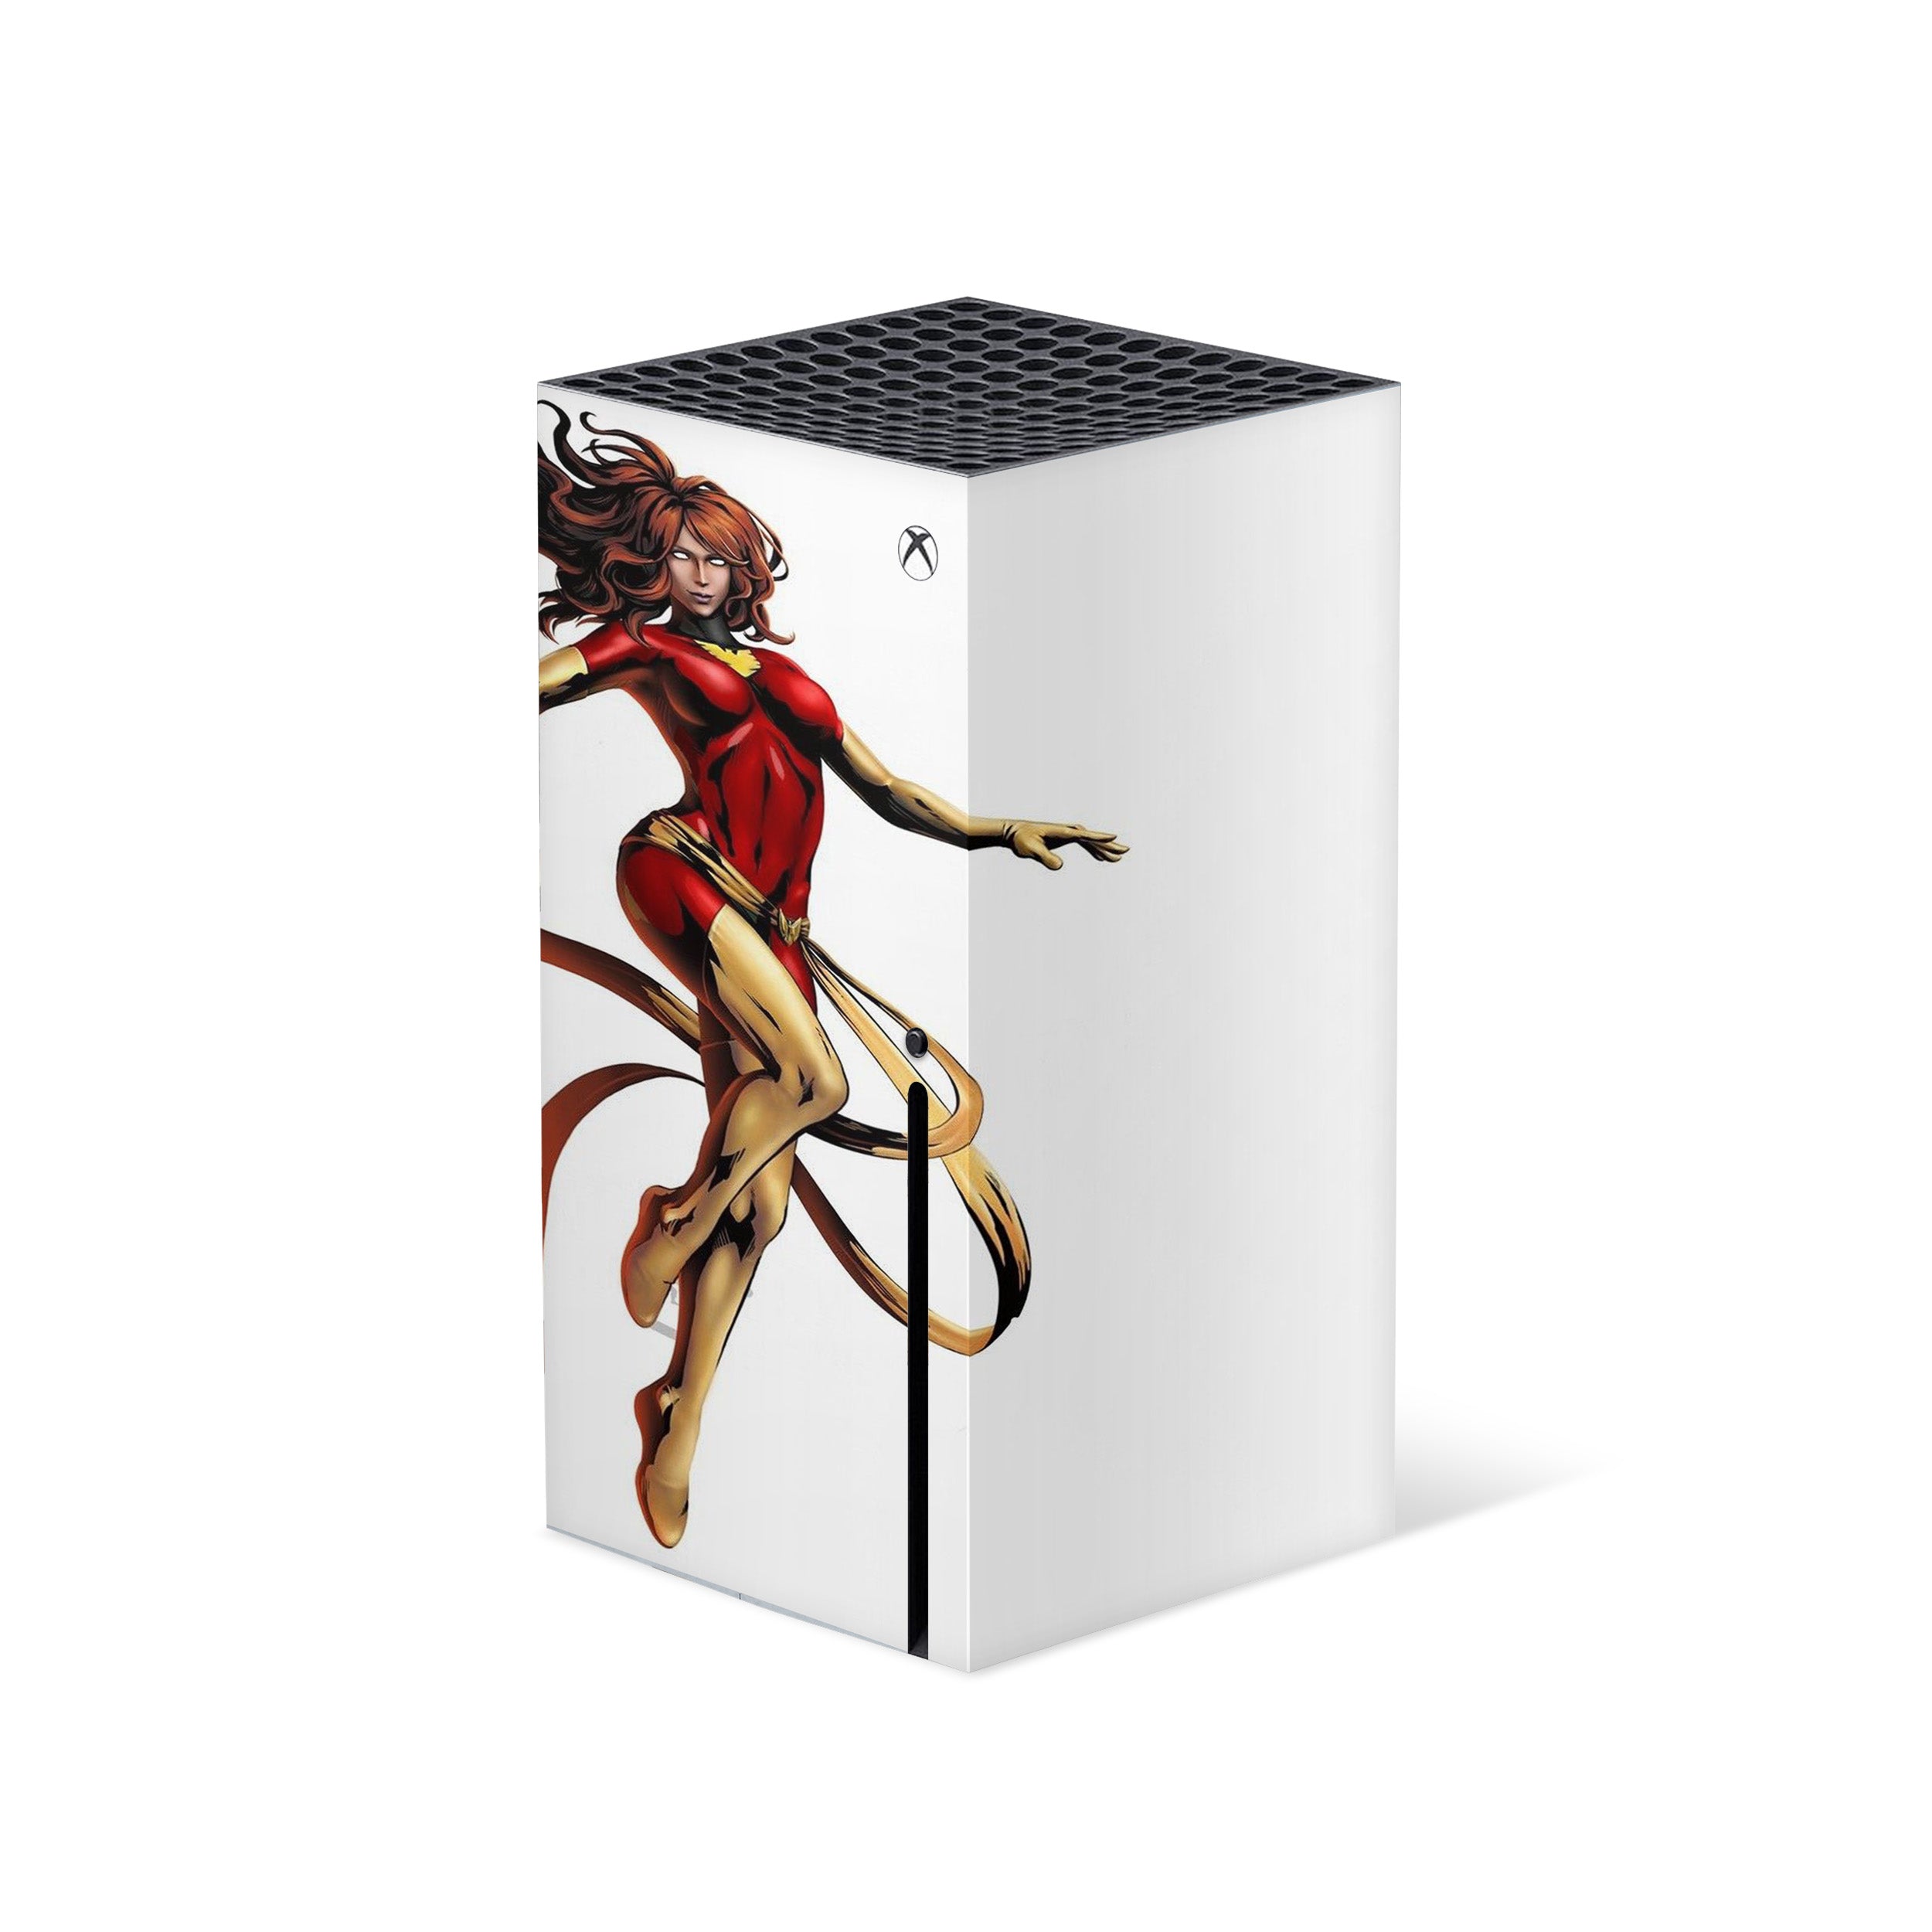 A video game skin featuring a Marvel X Men Phoenix design for the Xbox Series X.